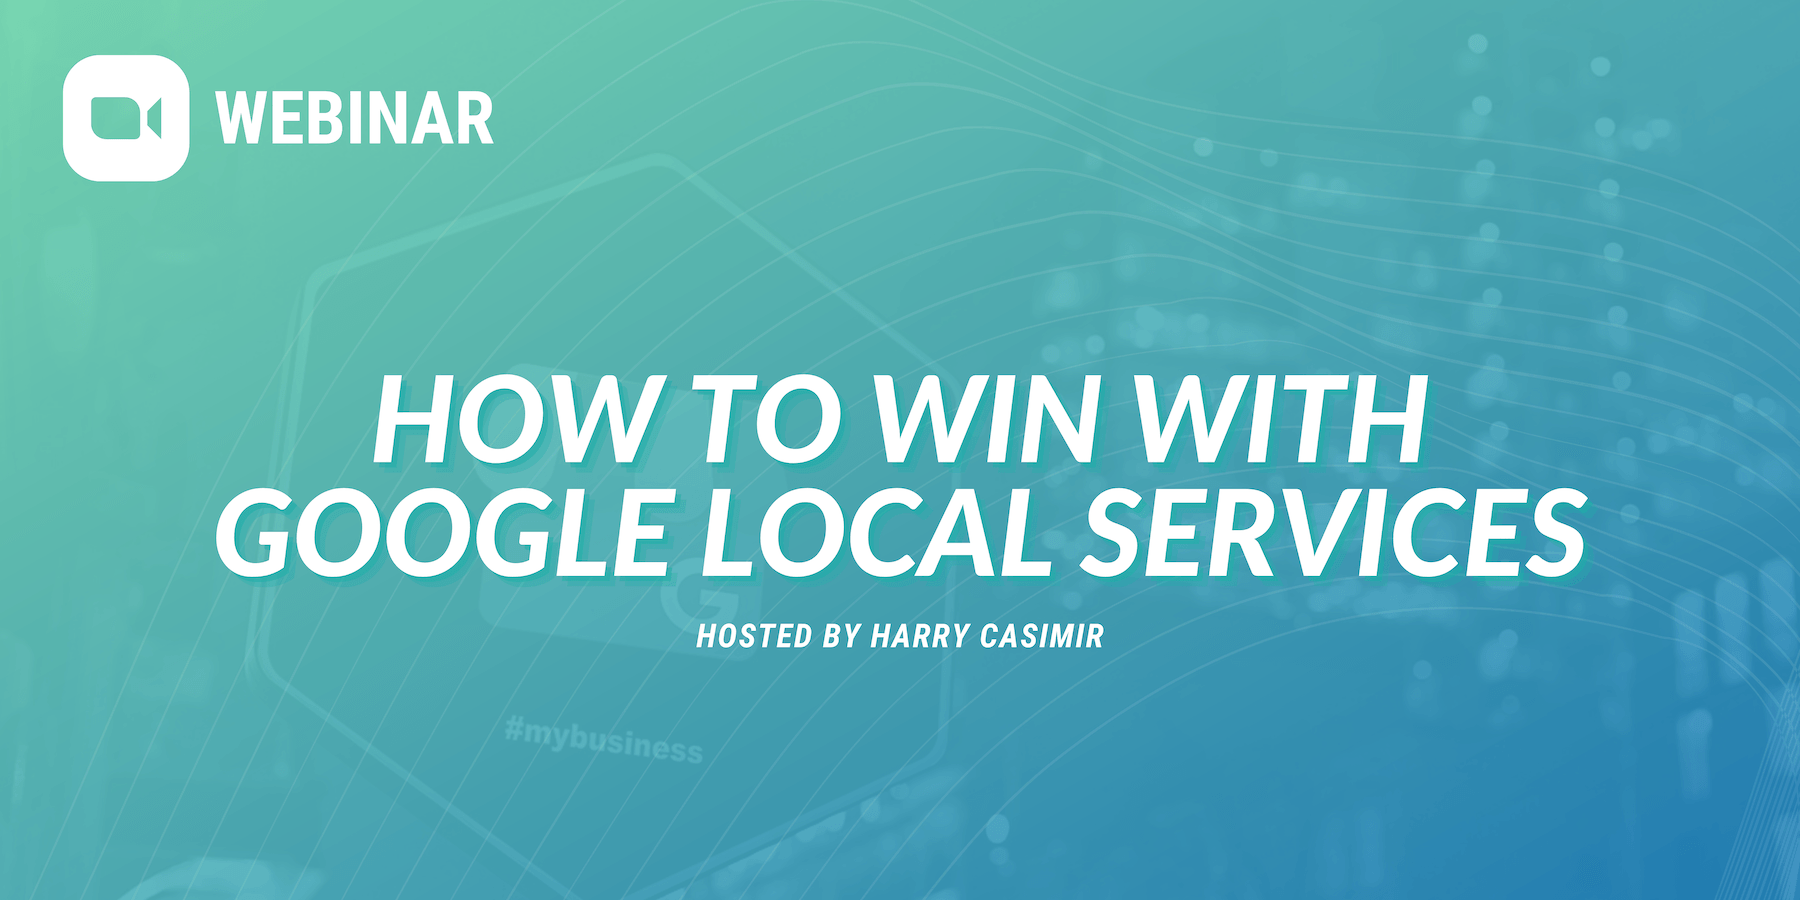 Webinar: How to win with Google local services